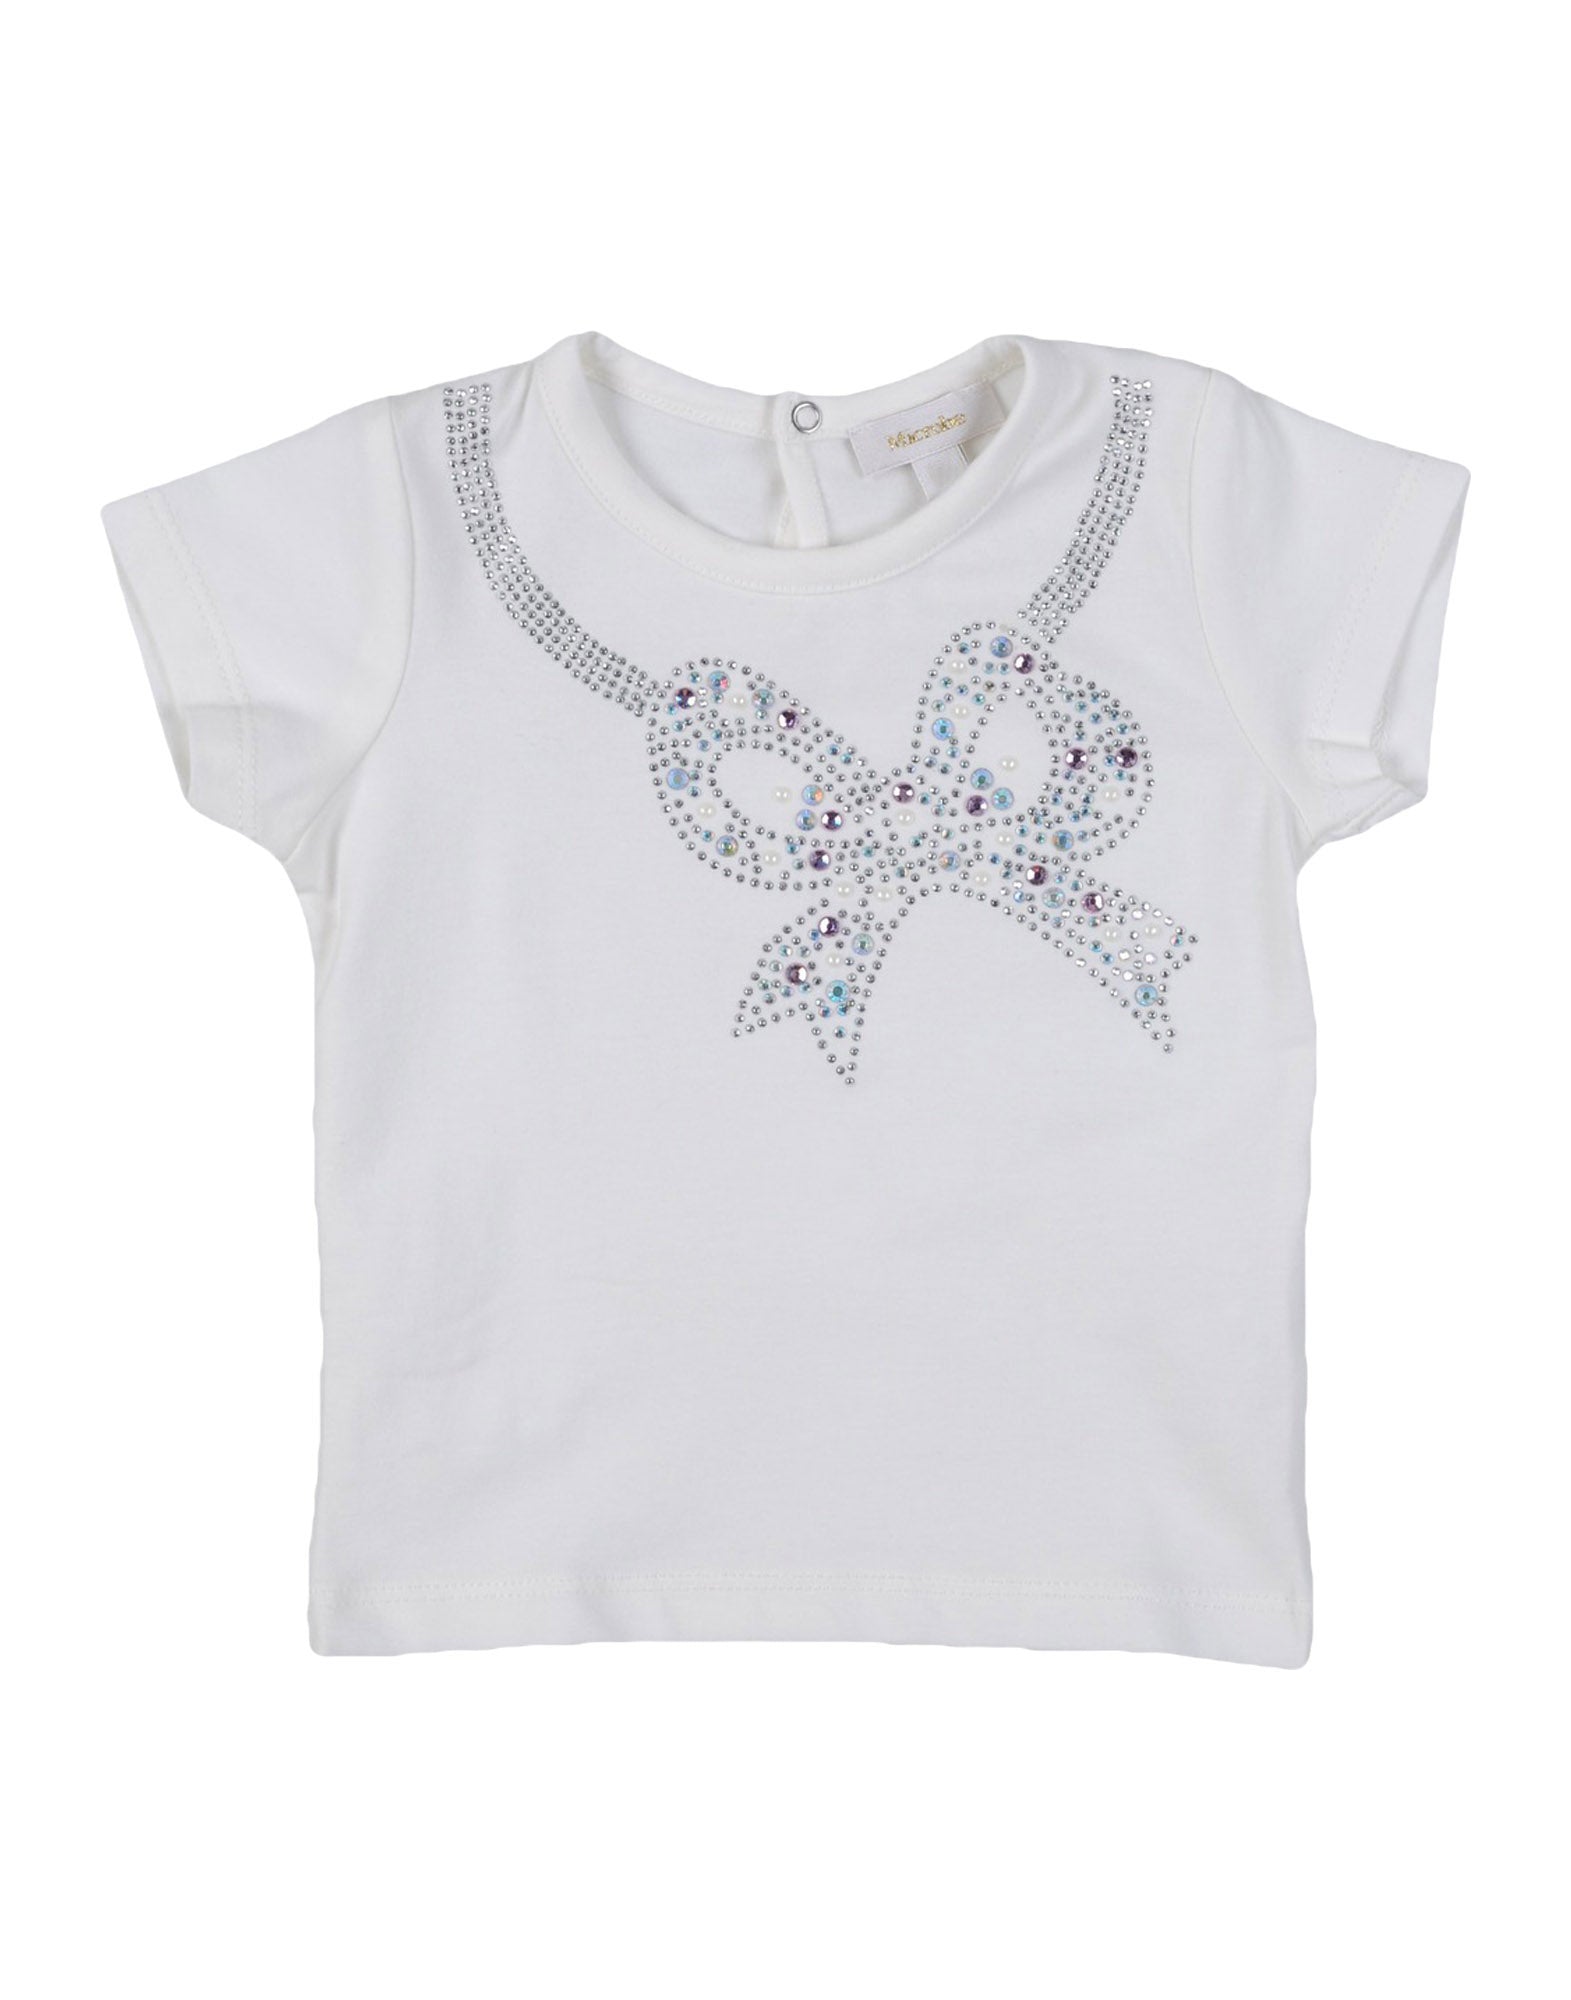 MICROBE BY MISS GRANT T-Shirt Top Size 6M Embellished Front Crew Neck gallery main photo